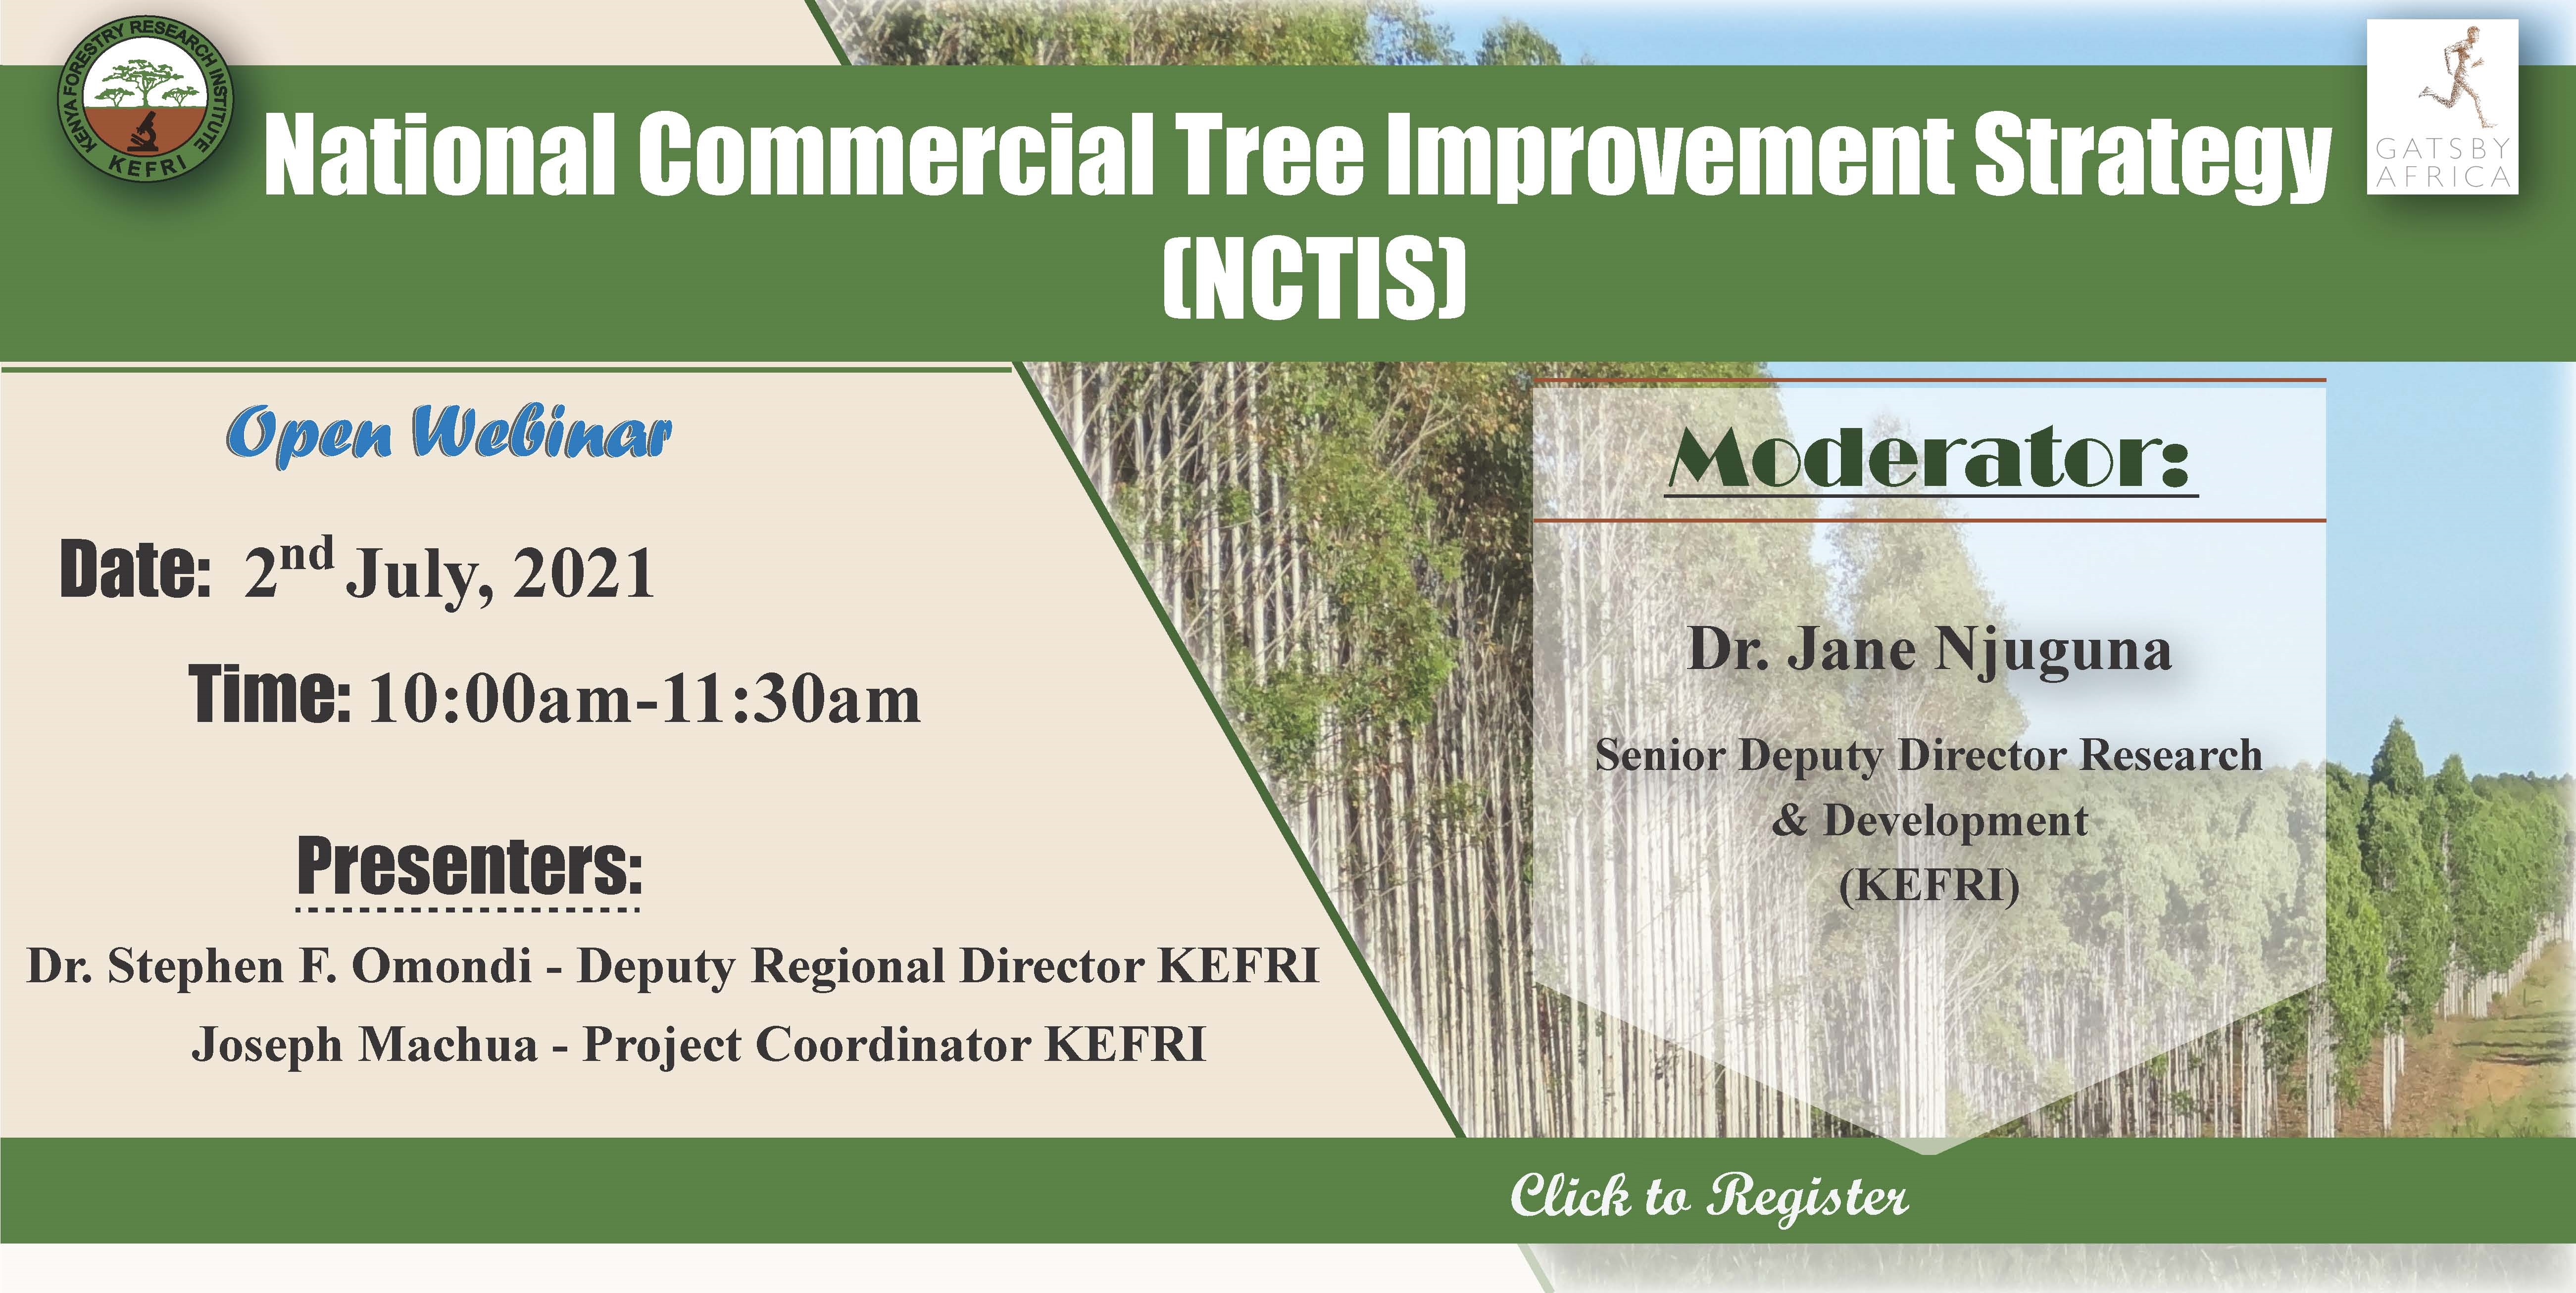 Second Public Participation Stakeholder Webinar on National Commercial Tree Improvement Strategy (NCTIS) by KEFRI